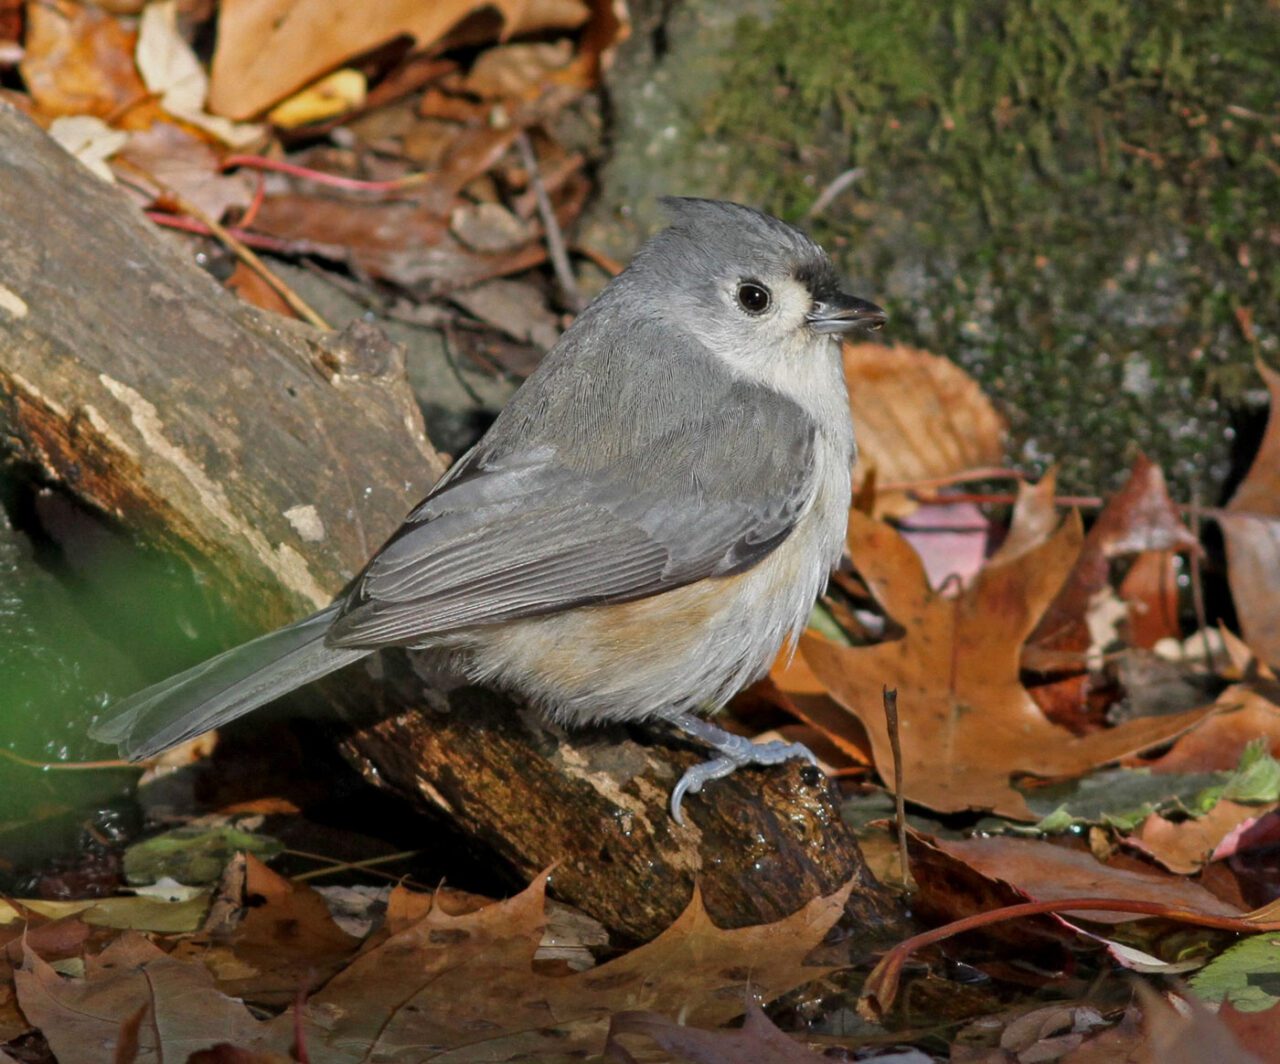 A gray, white and beige bird with a gray crest, black eye and little black bill, drinking and stands in the leaves.